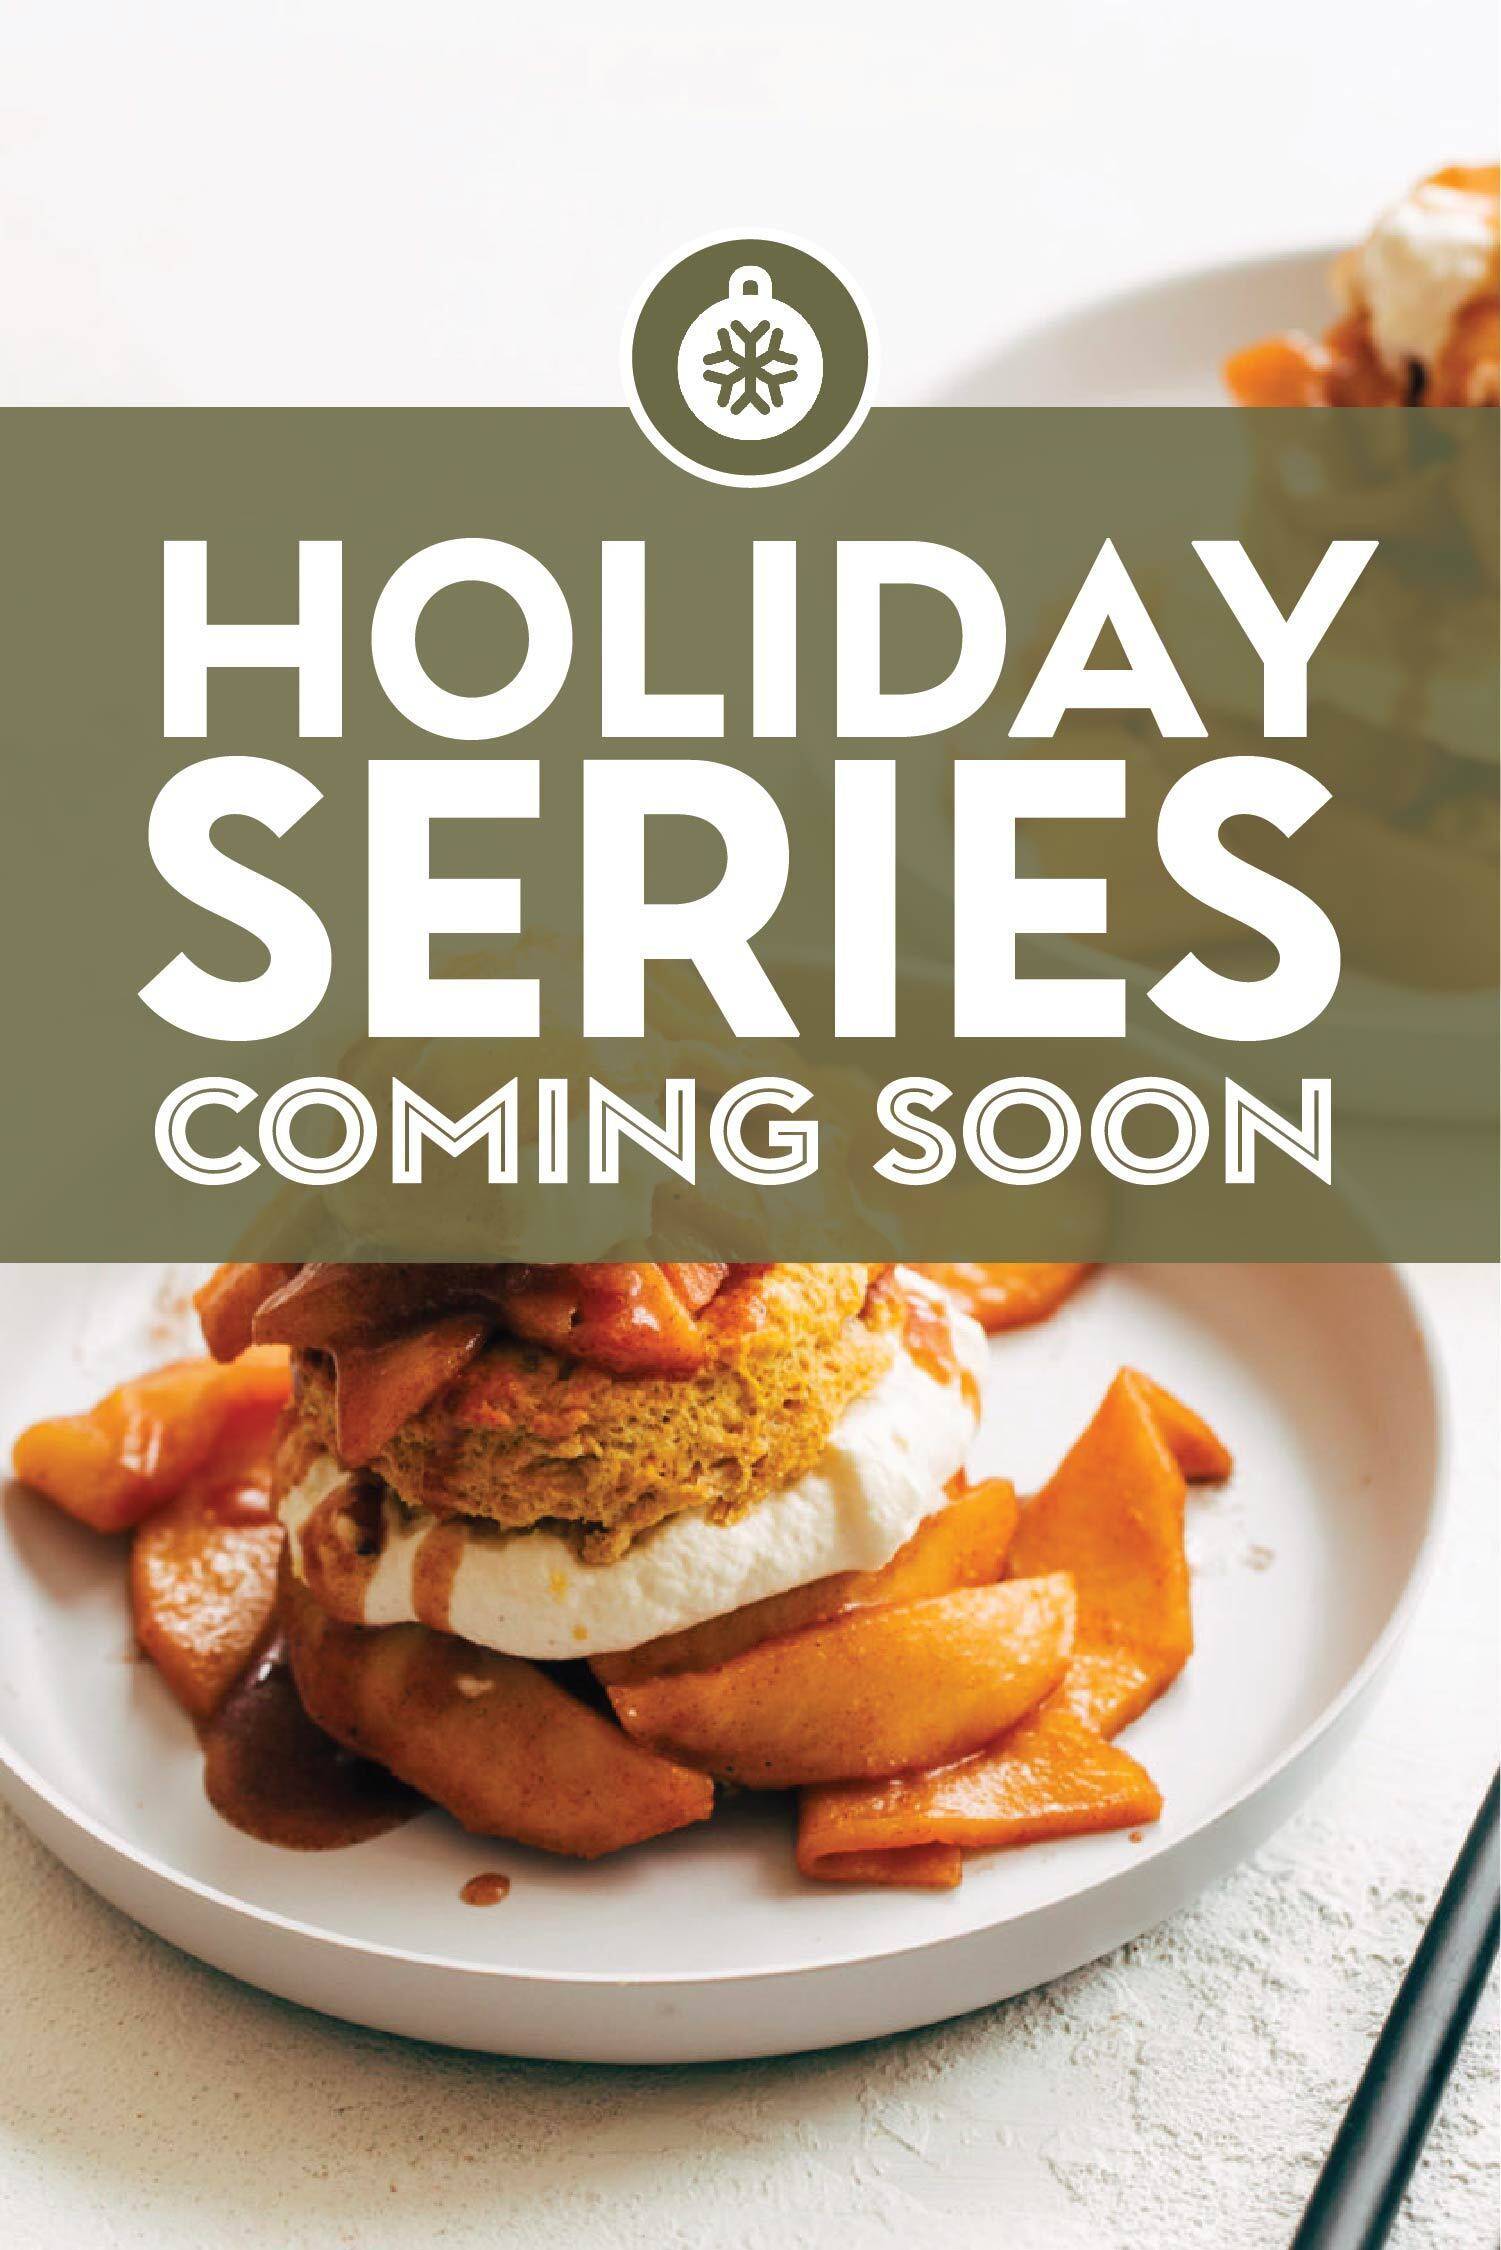 Image of Pumpkin Shortcakes with Cinnamon Apples and Maple Whipped Cream Cheese with a banner that says "Holiday Series-Coming Soon".